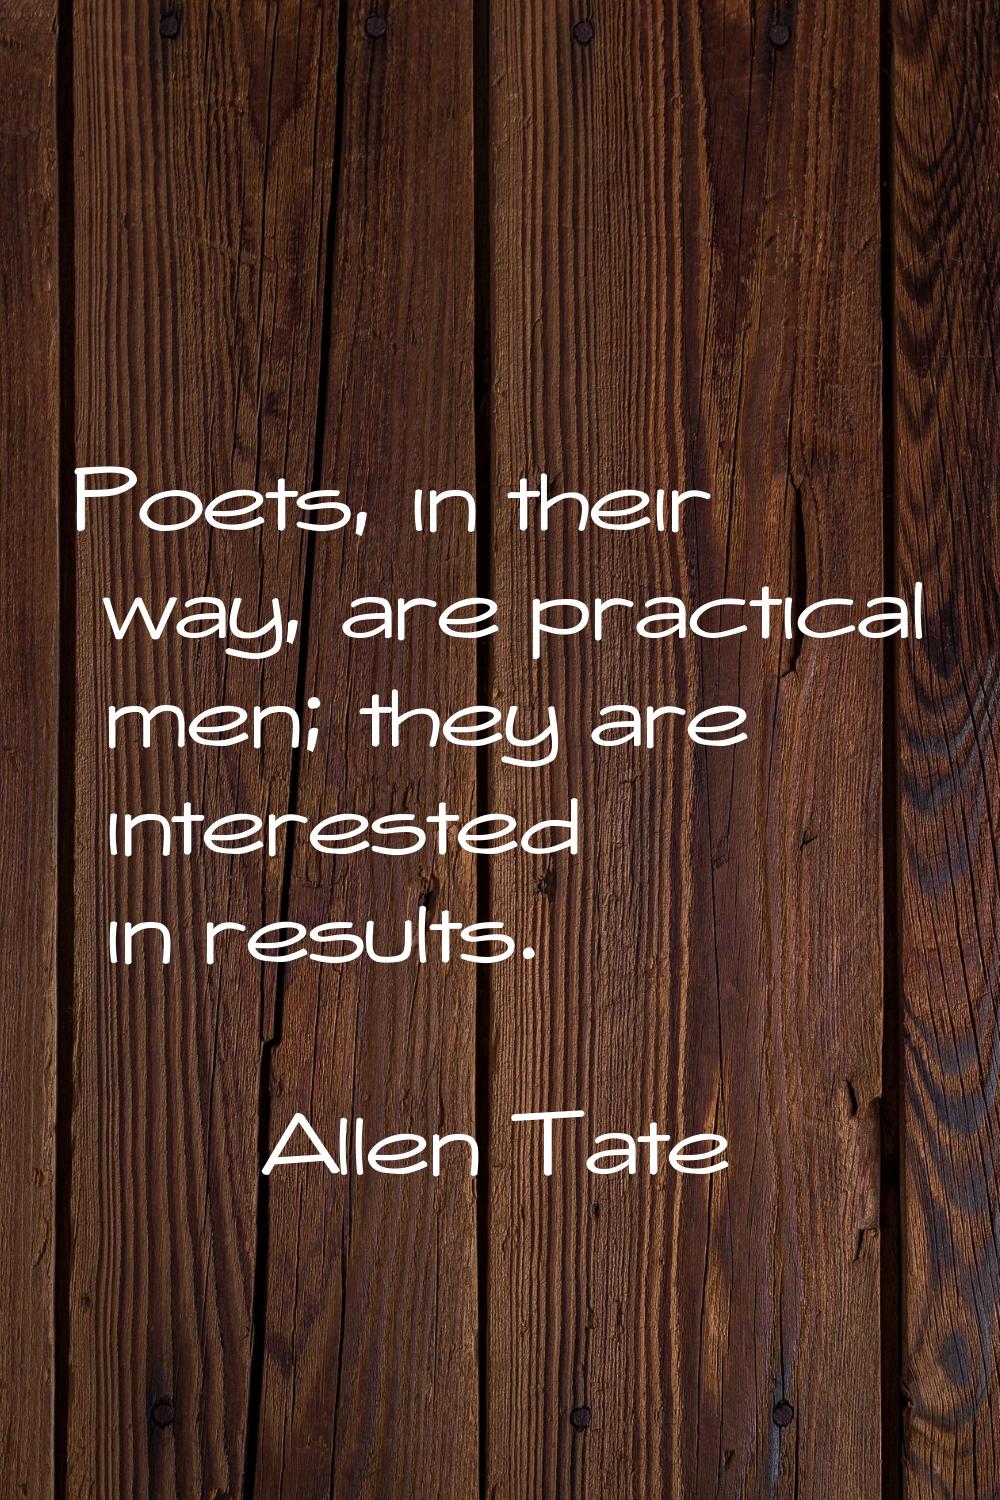 Poets, in their way, are practical men; they are interested in results.